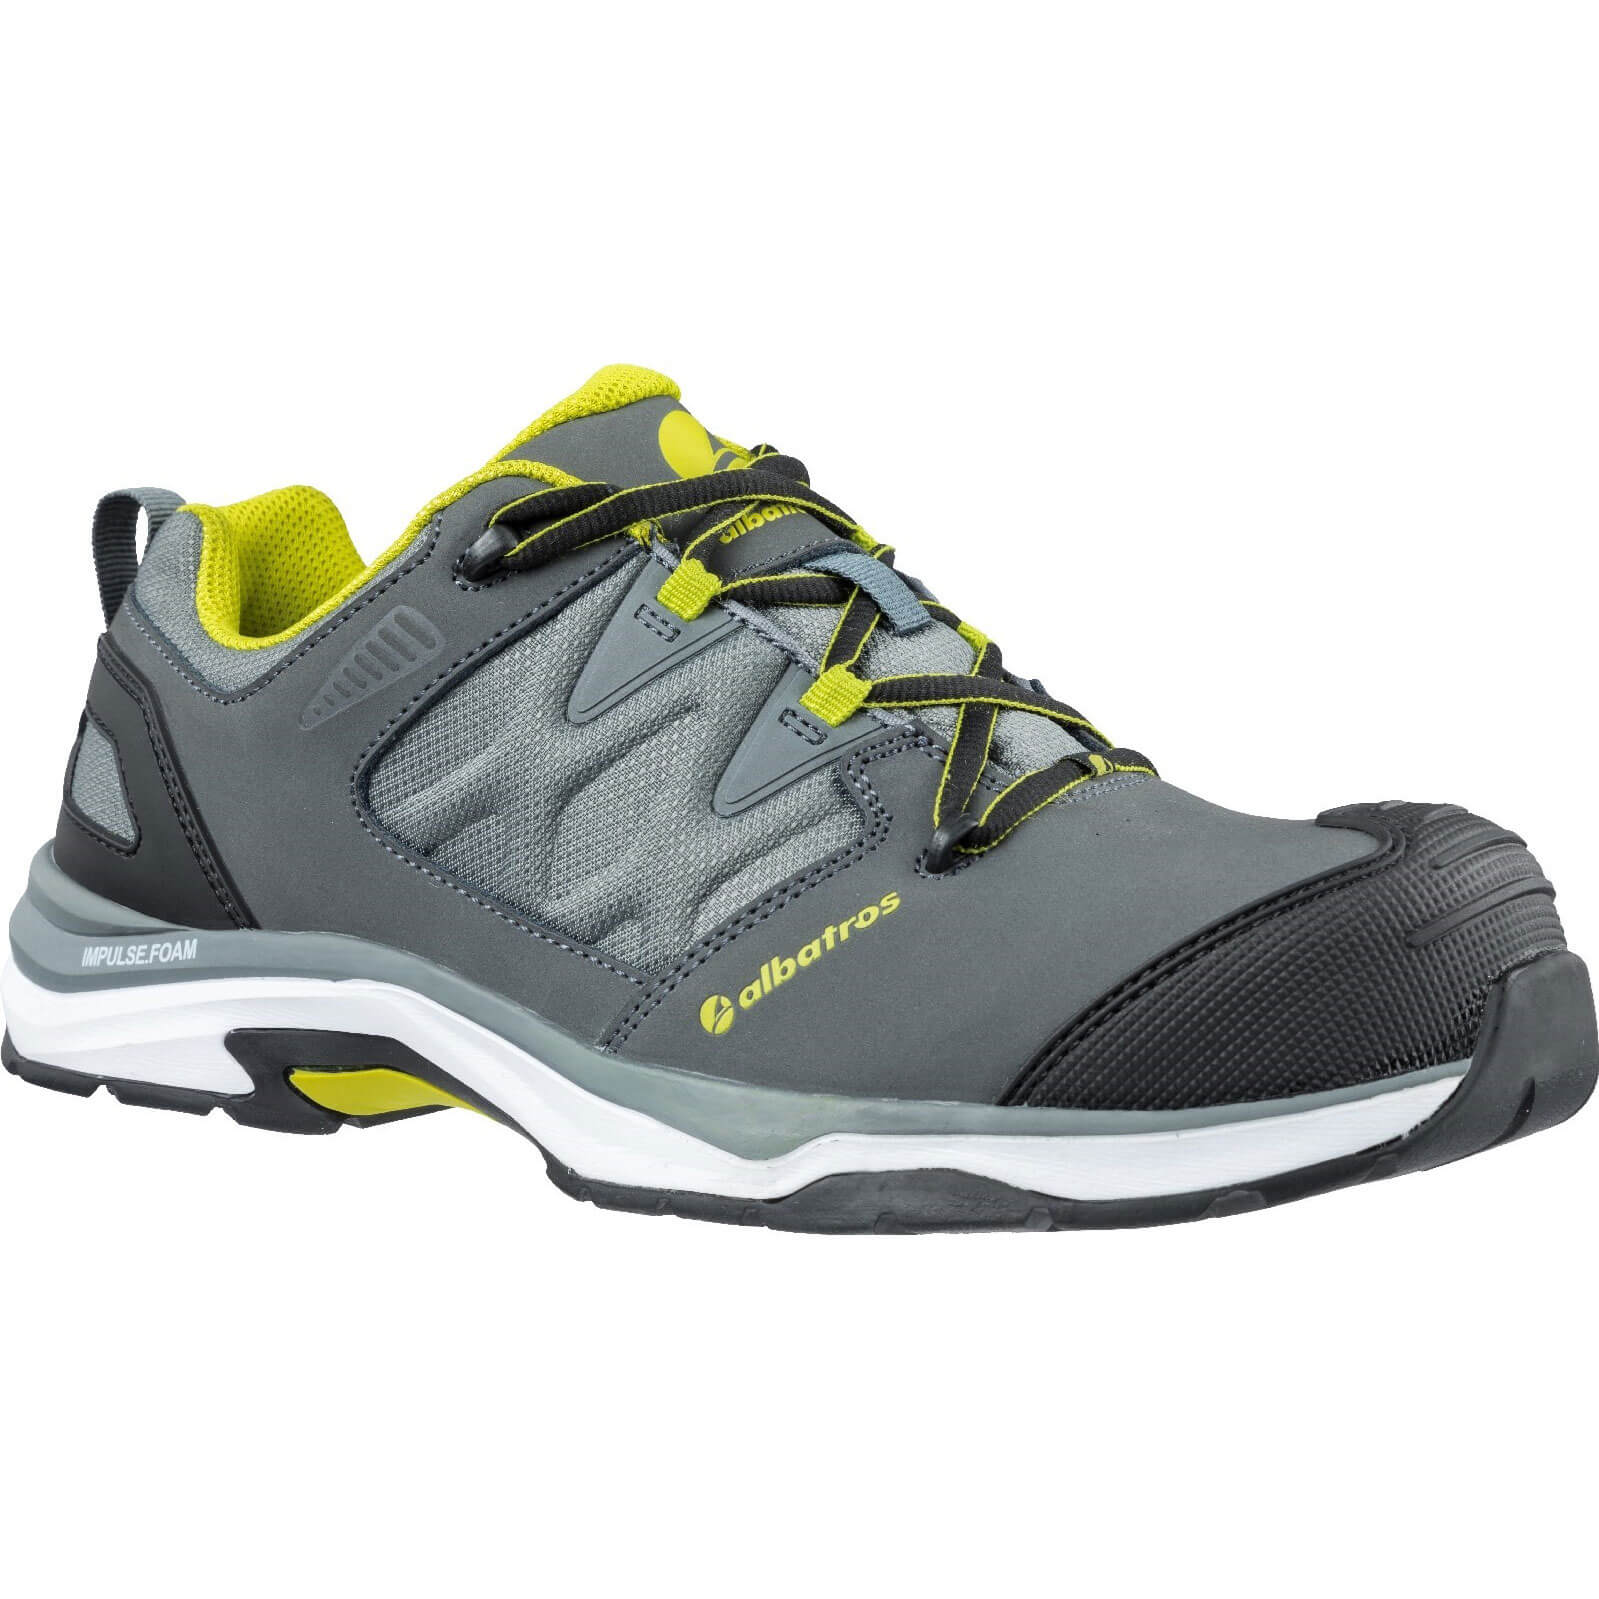 Image of Albatros Ultratrail Low Lace Up Safety Shoe Grey Size 8